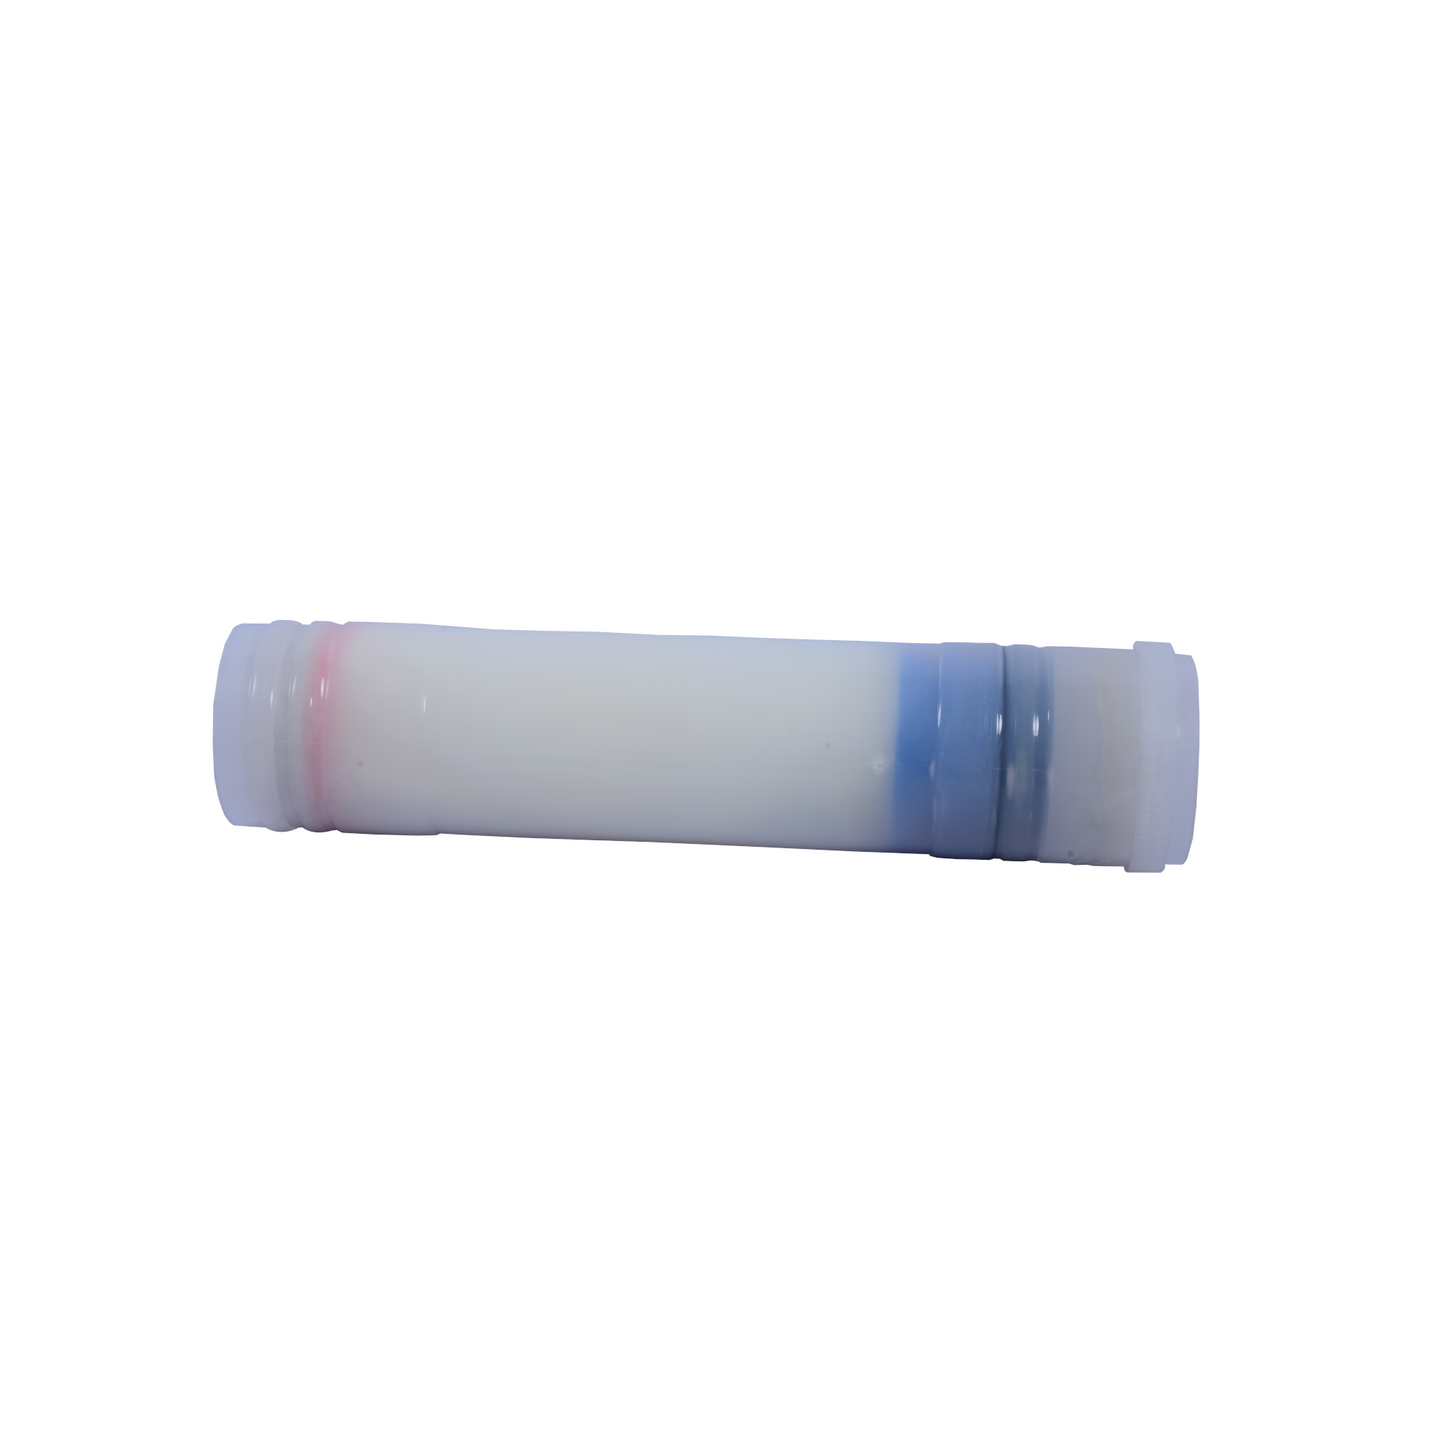 RO-UF-1 RO-Pure UF (Ultra-Filtration) Filter for RO Water Purifier | RO spare parts